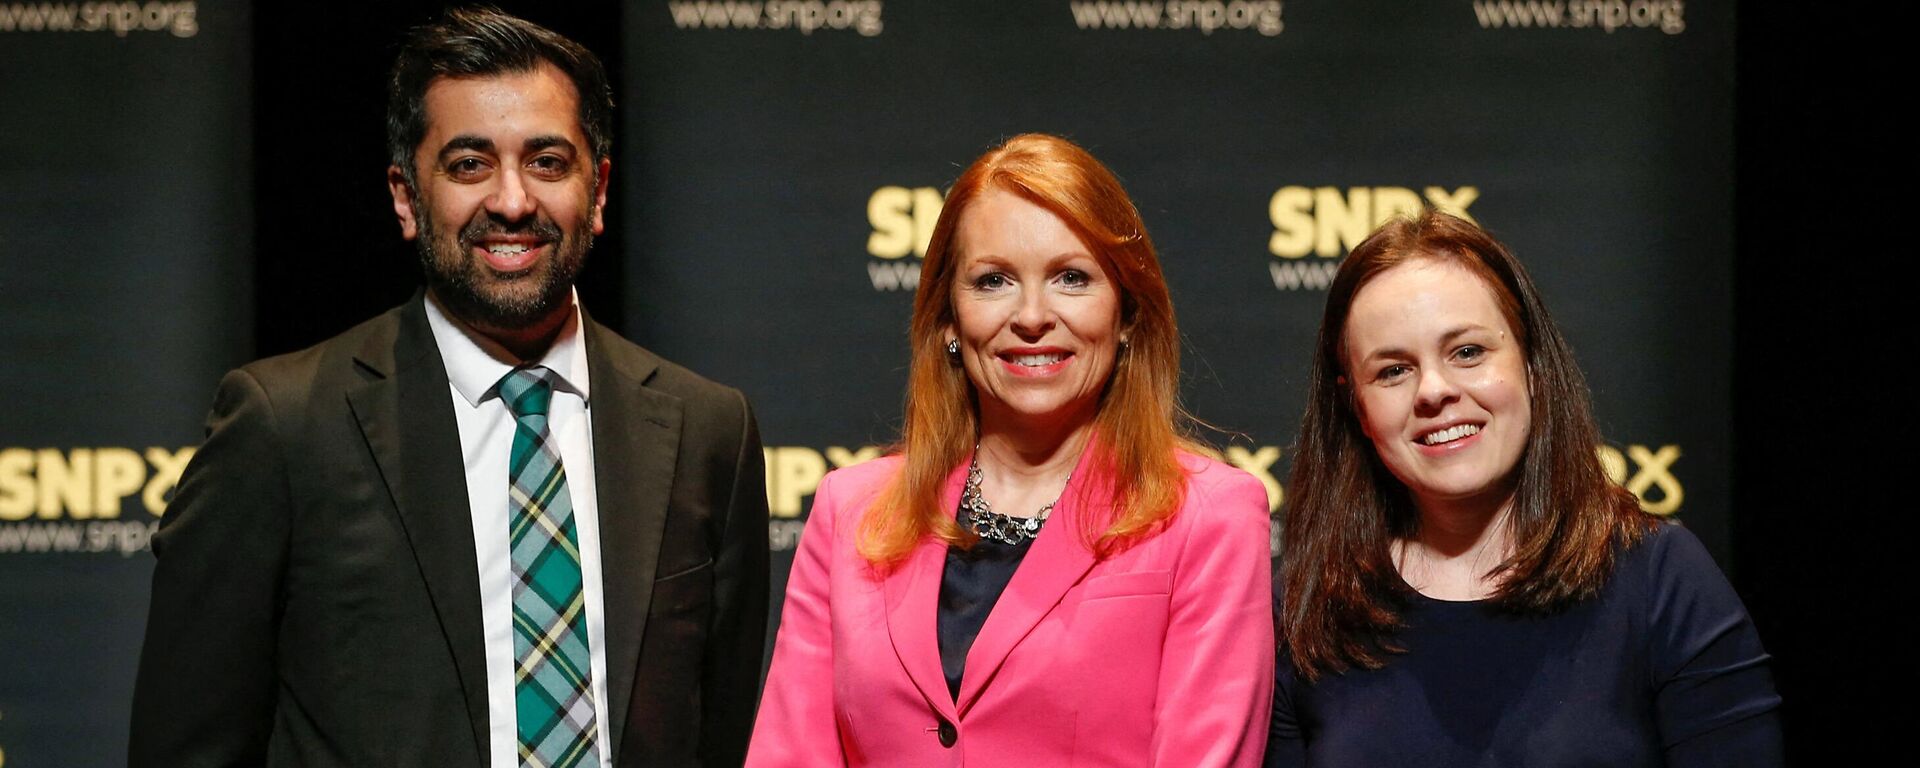 Contenders to become the leader of the Scottish National Party (SNP), and Scotland's First Minister, SNP MSP Ash Regan (C), Scotland's Finance Minister and SNP MSP Kate Forbes (R), and Scotland's Health Minister and SNP MSP Humza Yousaf pose for a photograph at a SNP leadership hustings in Aberdeen on March 12, 2023. - Sputnik International, 1920, 27.03.2023